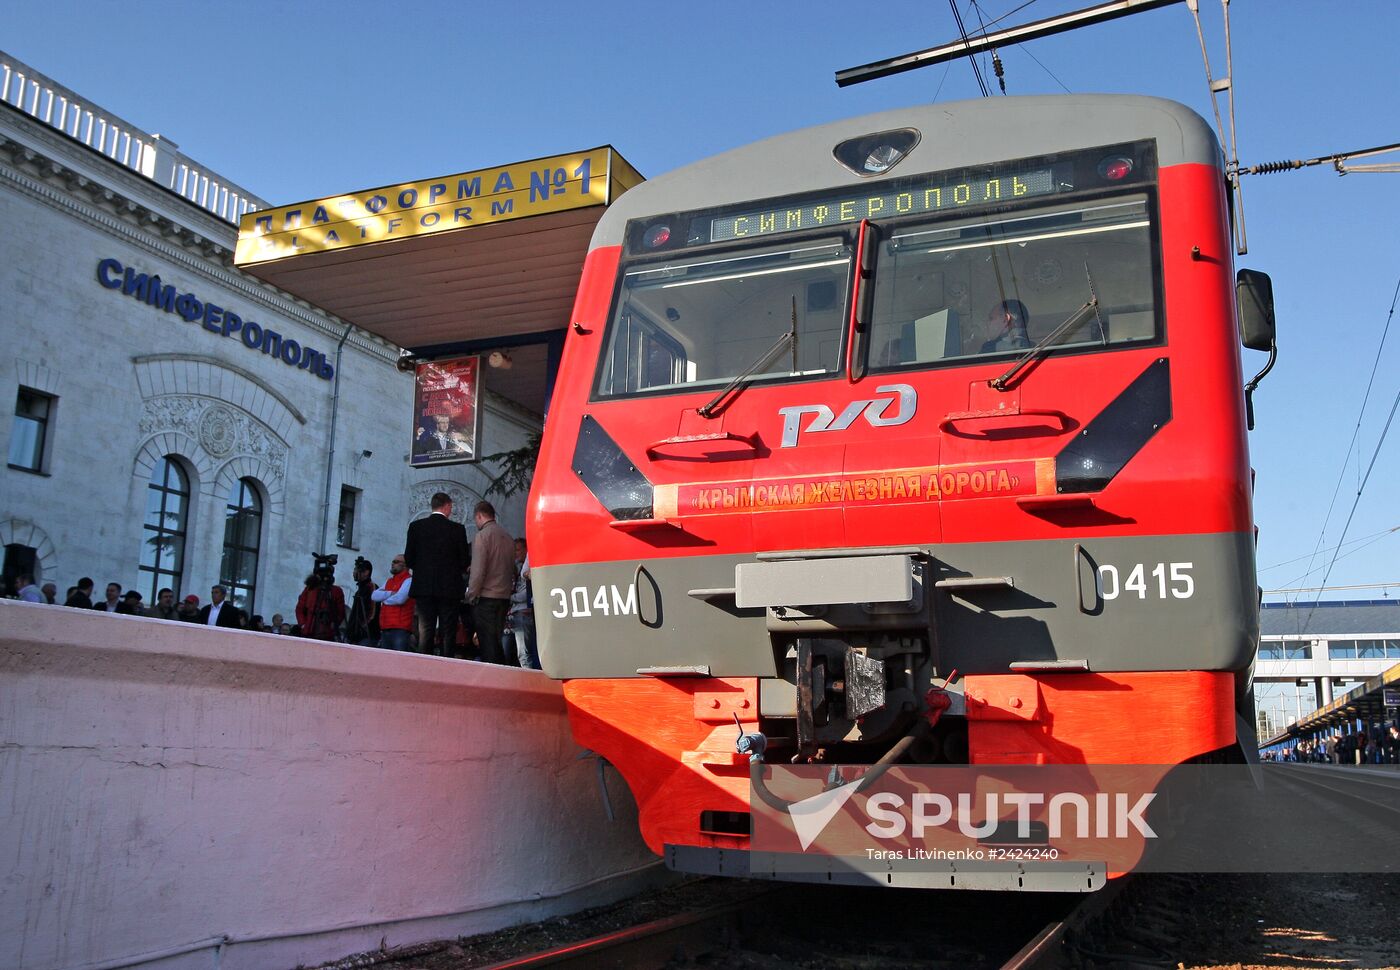 New electric train handed over to Crimea by Russian railroaders